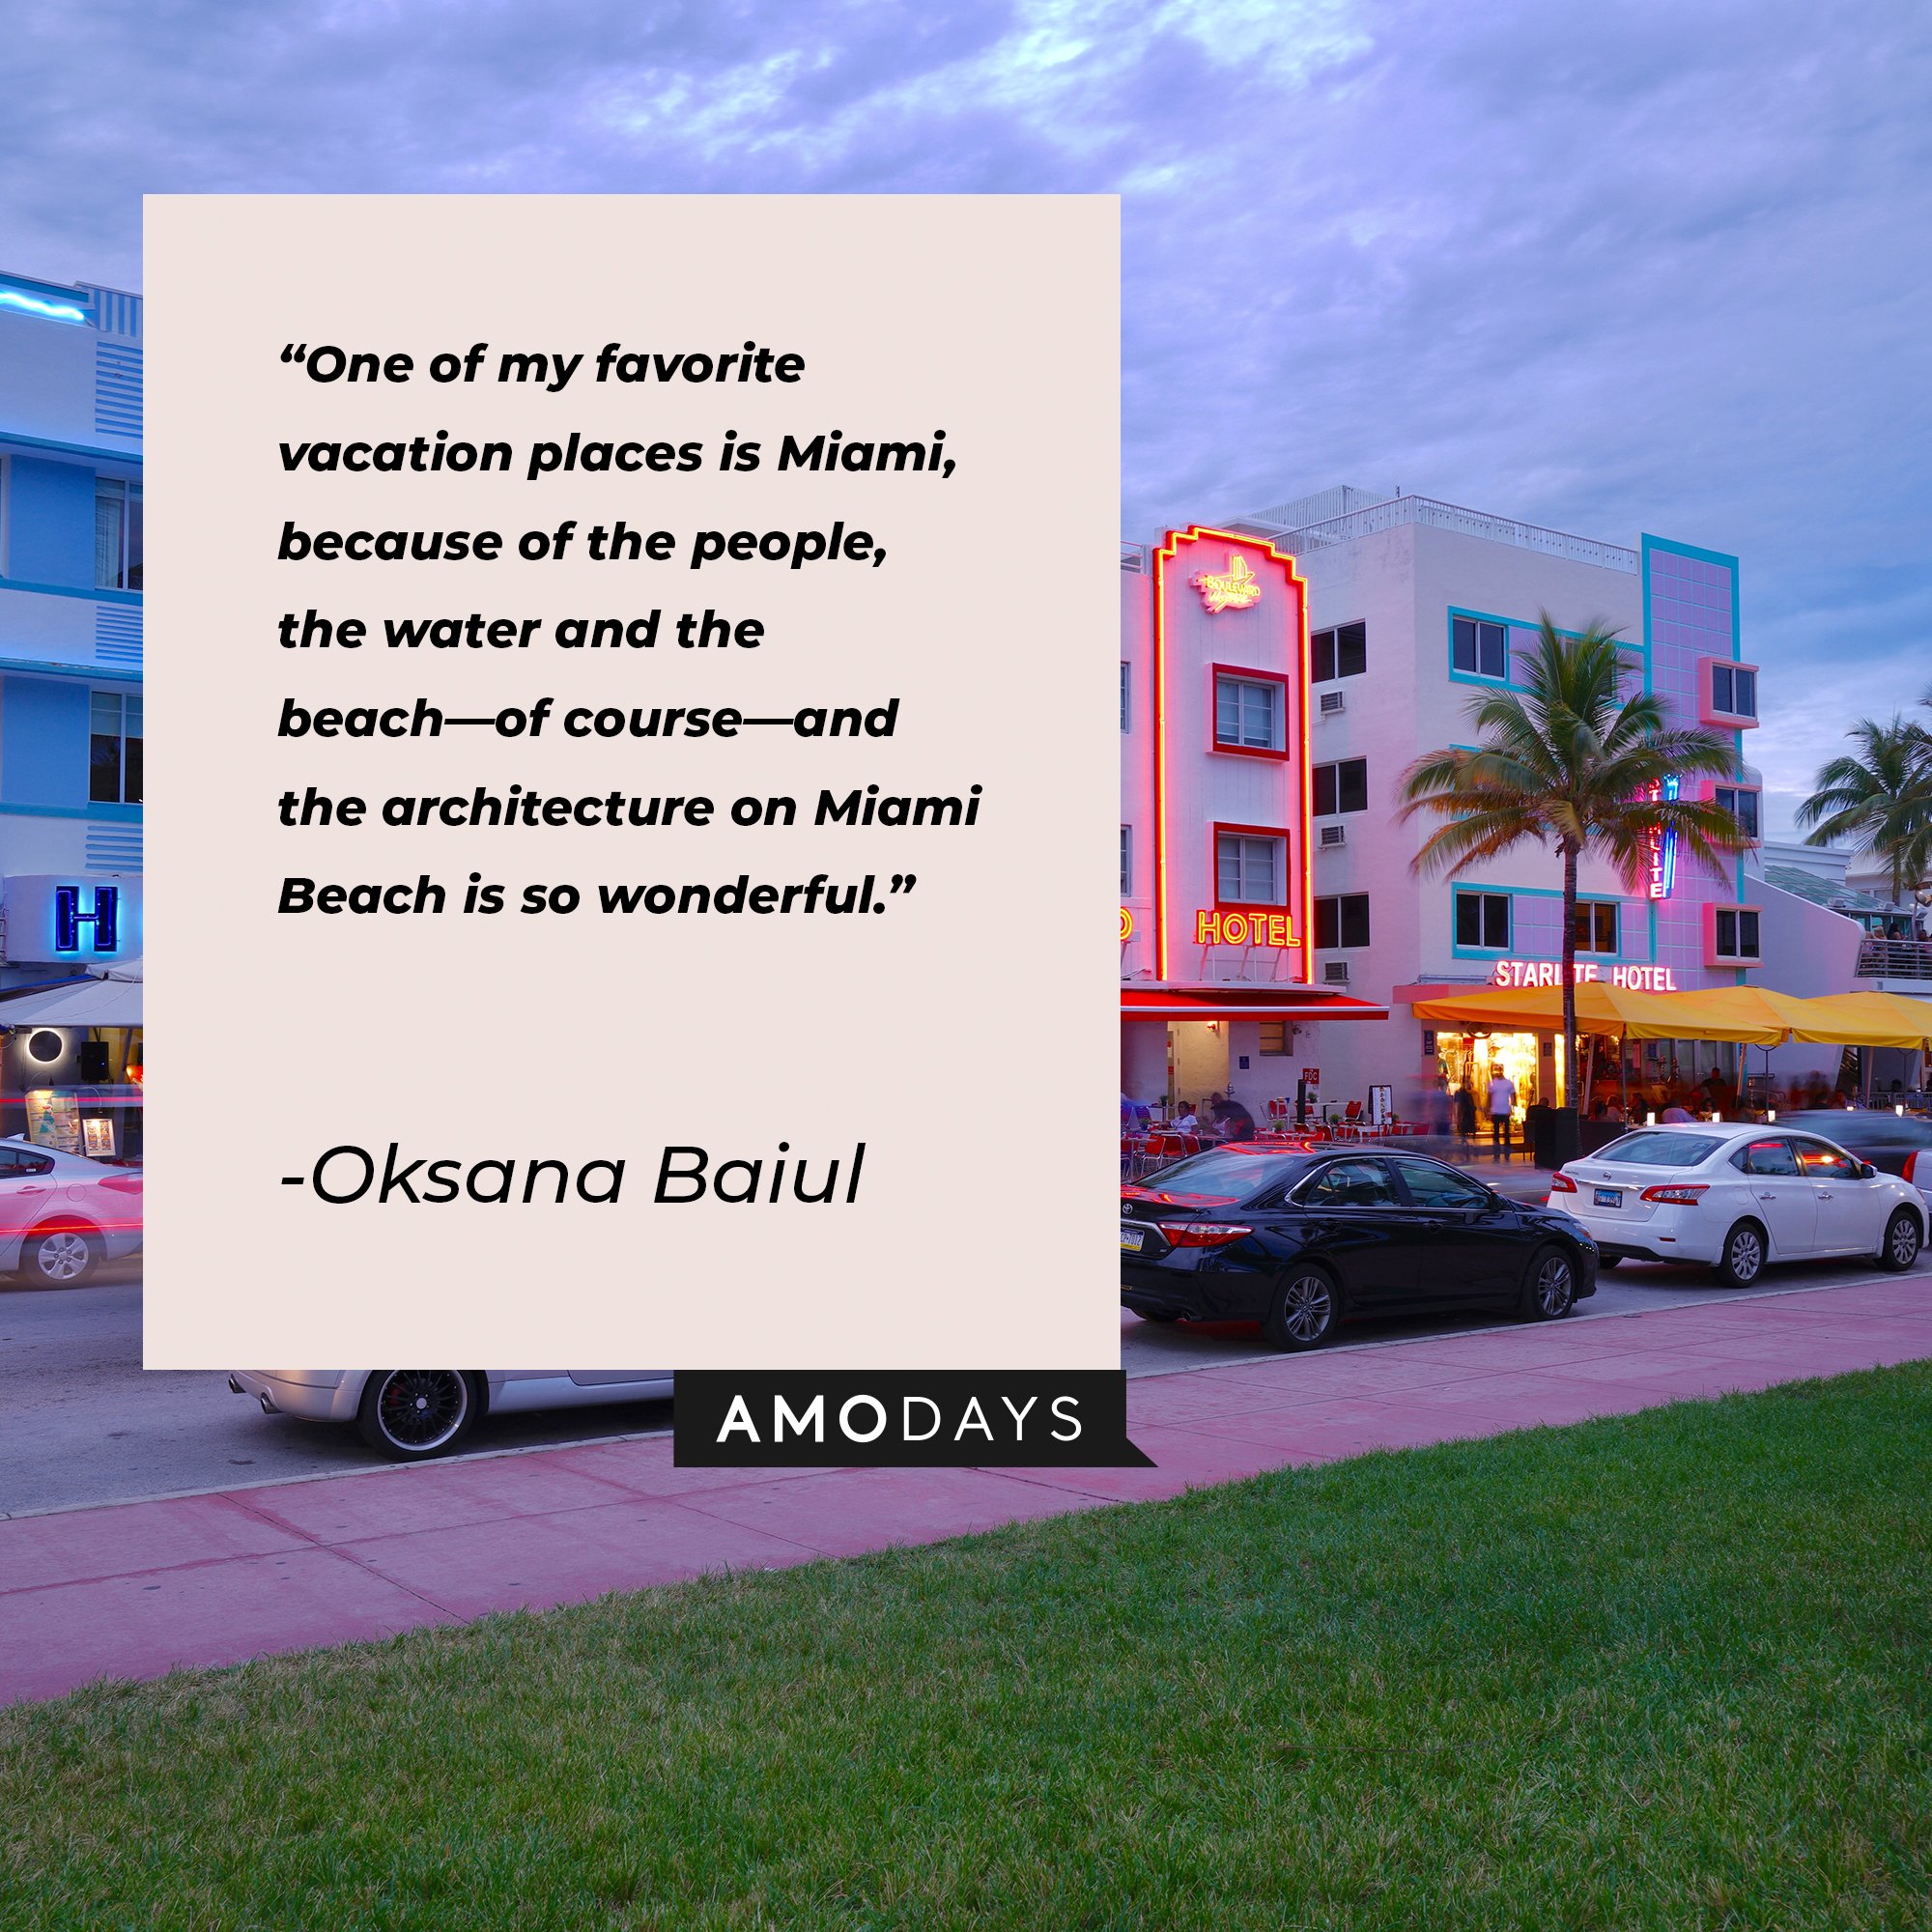 Oksana Baiul’s quote: "One of my favorite vacation places is Miami, because of the people, the water and the beach—of course—and the architecture on Miami Beach is so wonderful.” | Image: AmoDays